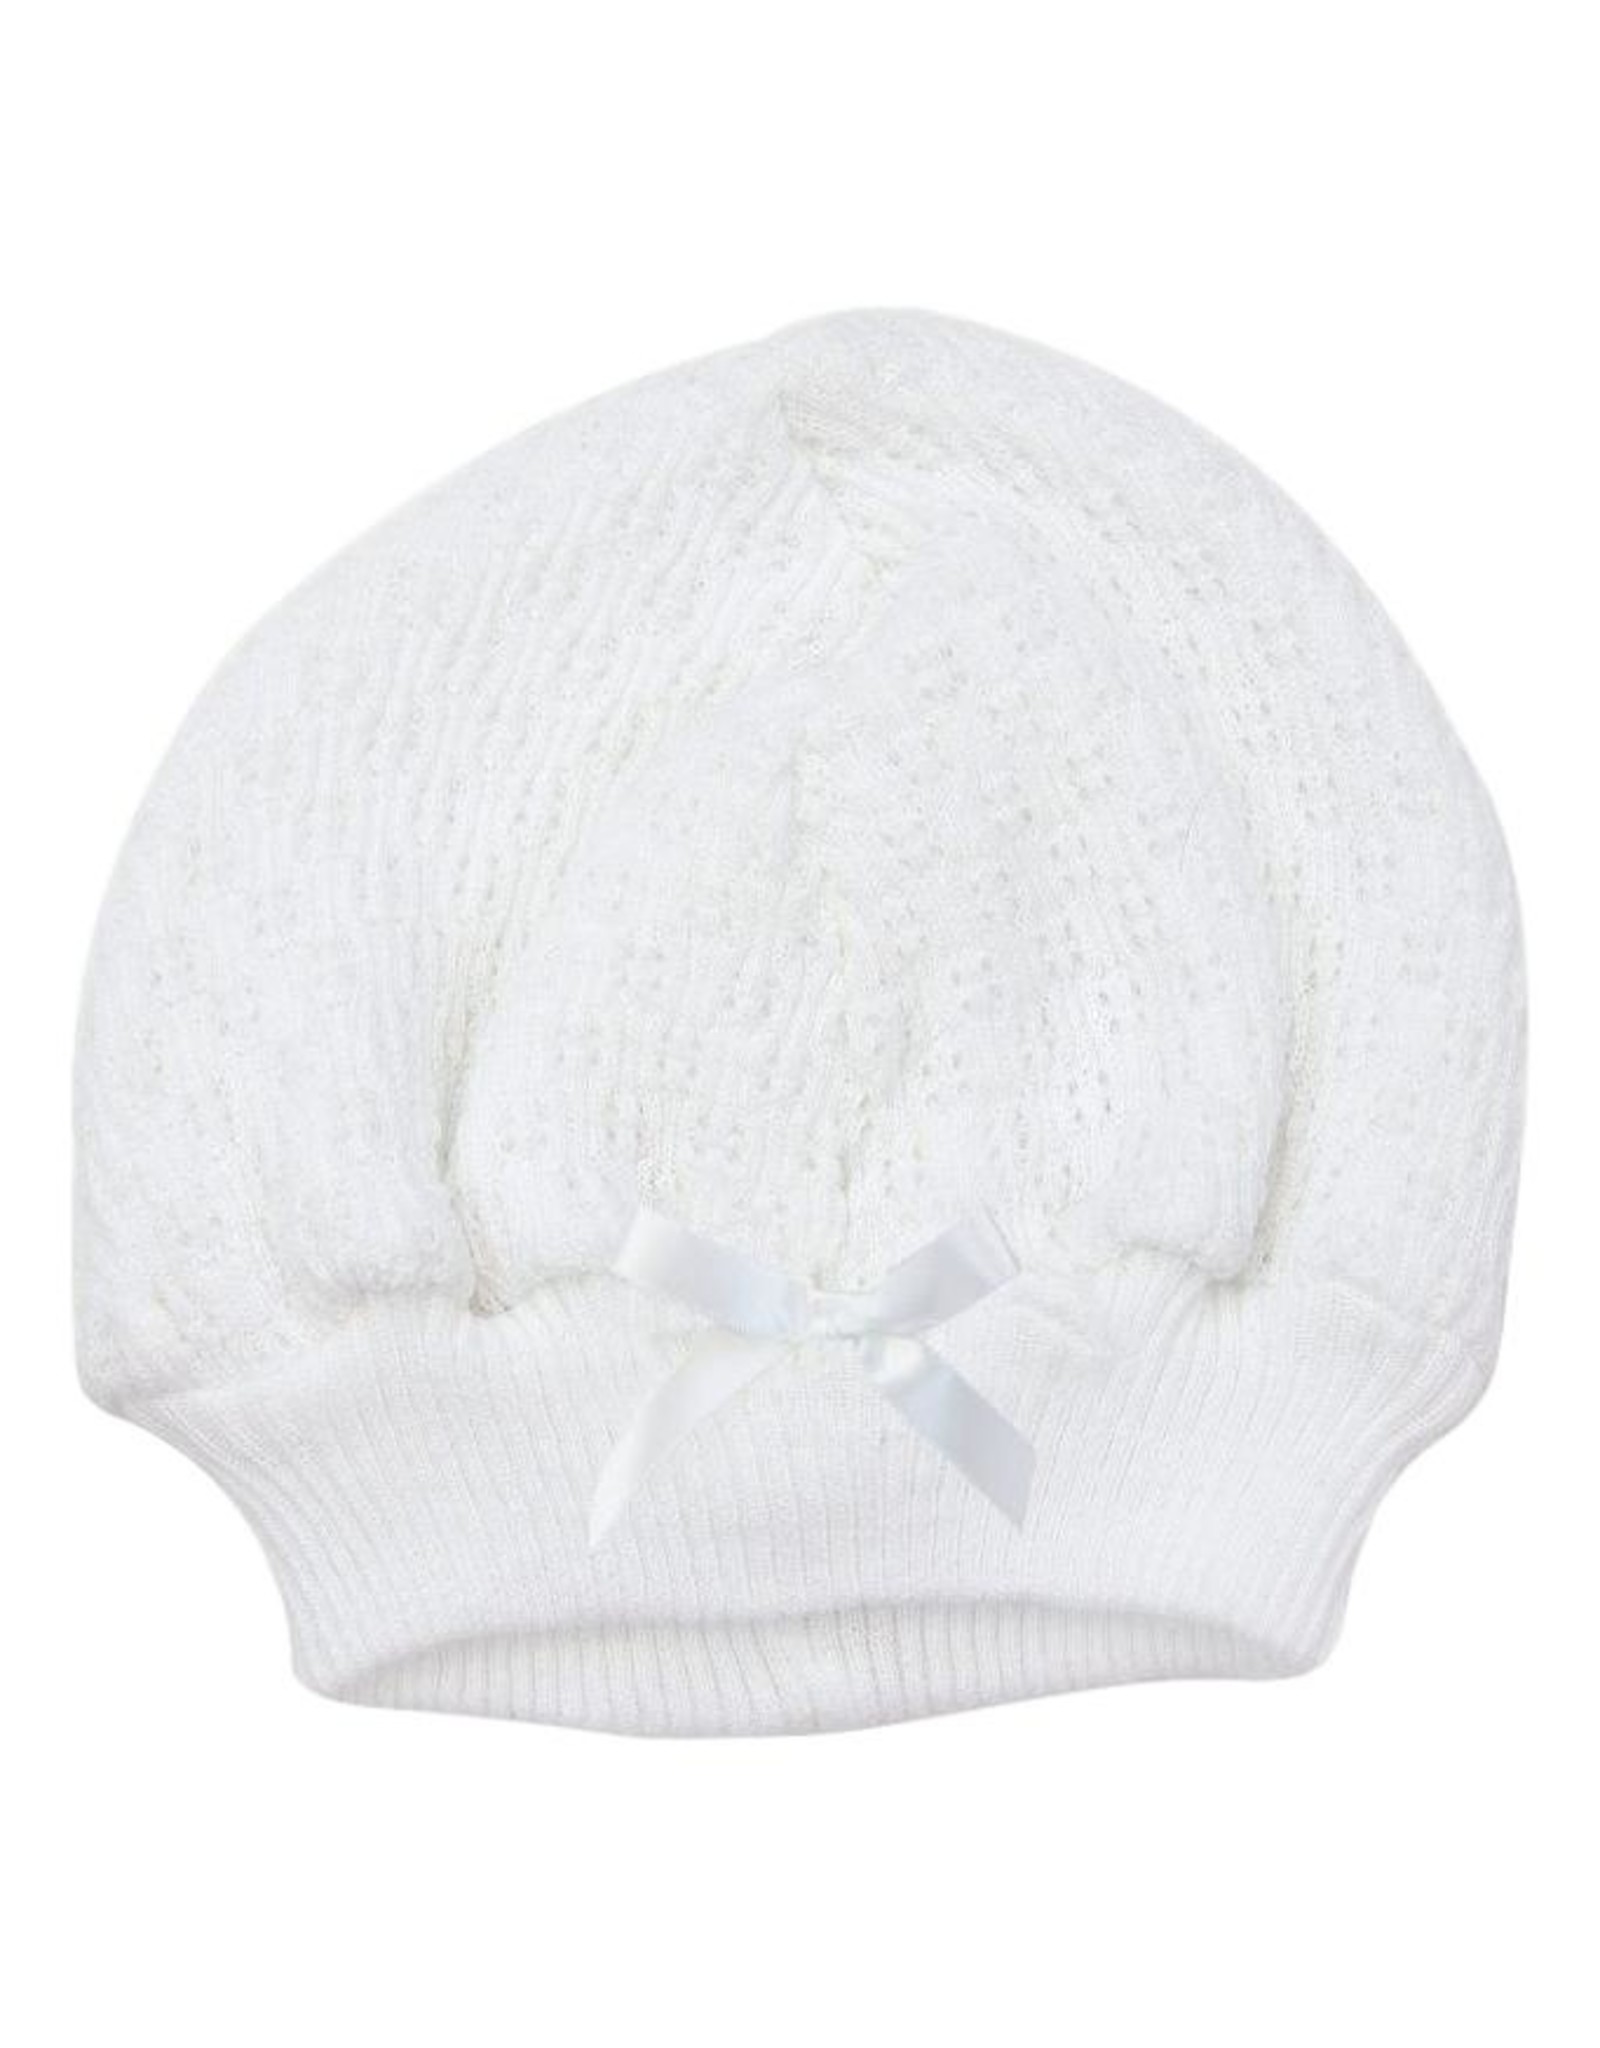 Paty, Inc. 105 Beanie Cap with Bow White